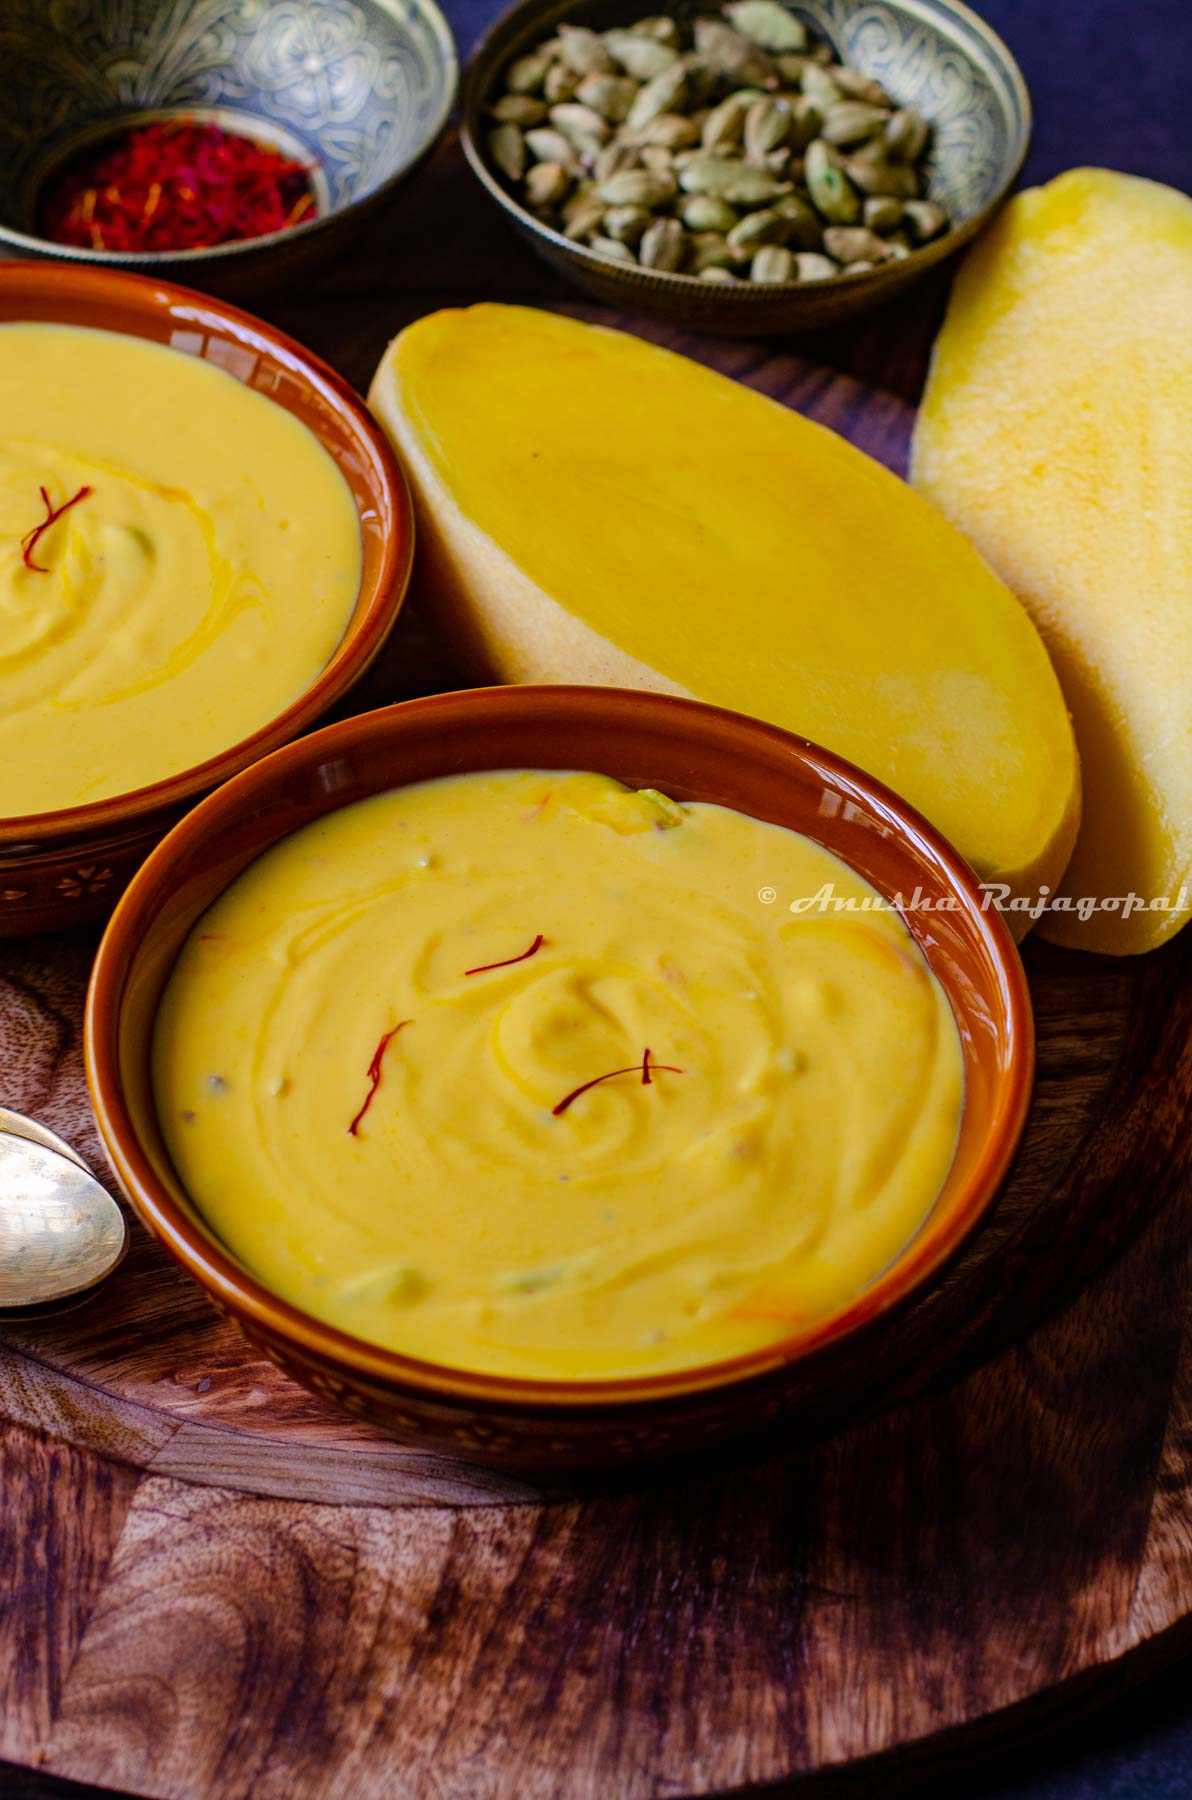 Aamrakhand served in a wooden platter with cut mangoes, saffron and cardamom